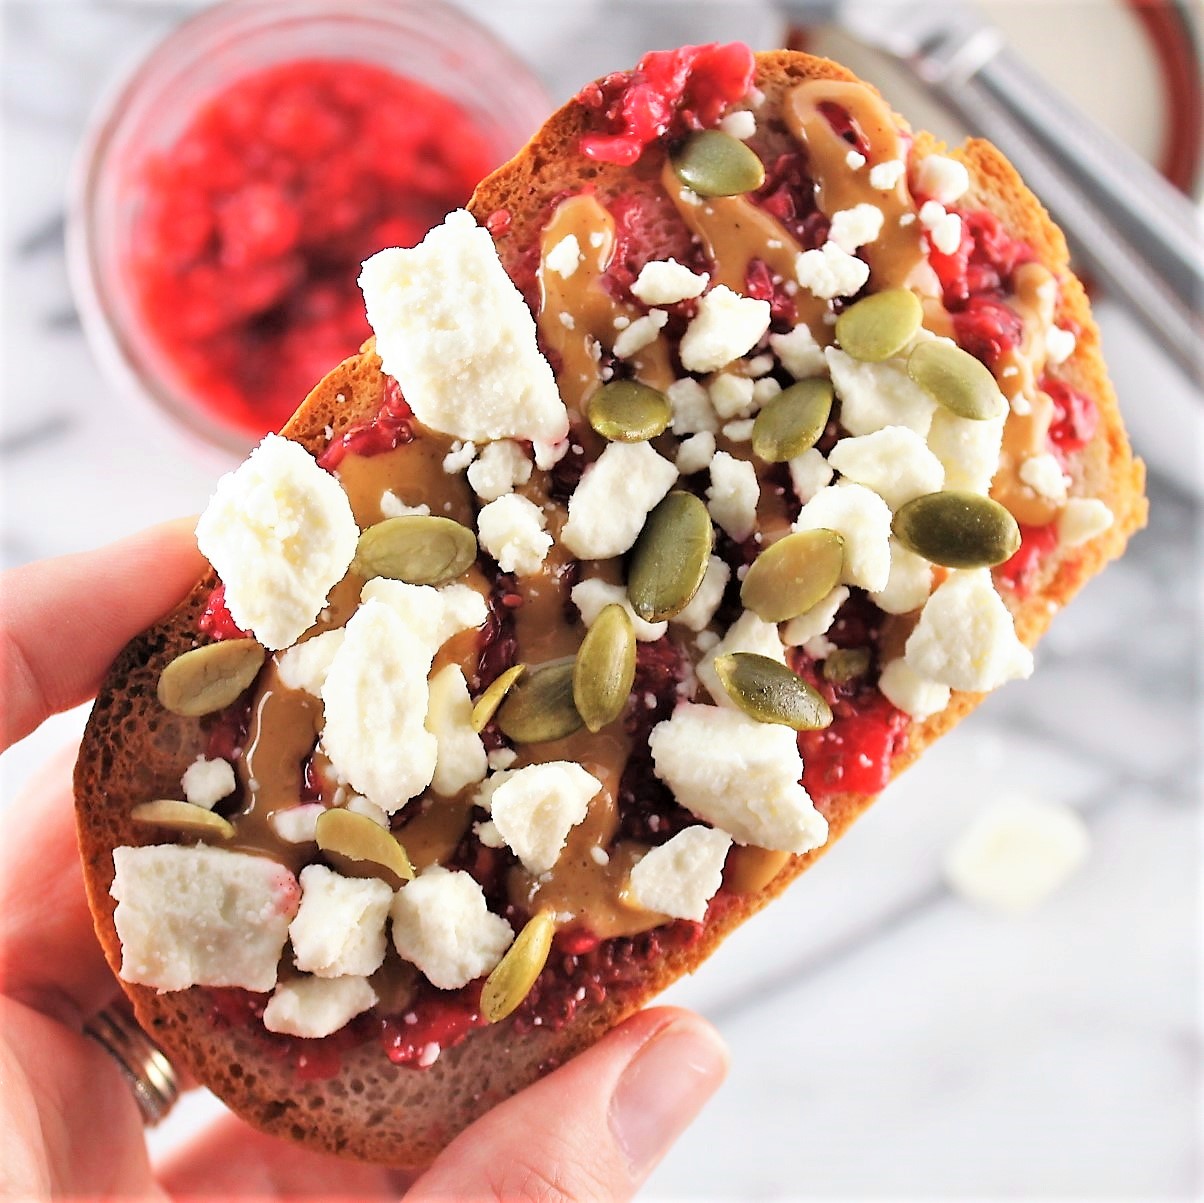  Peanut Butter Jelly and Feta Toast 